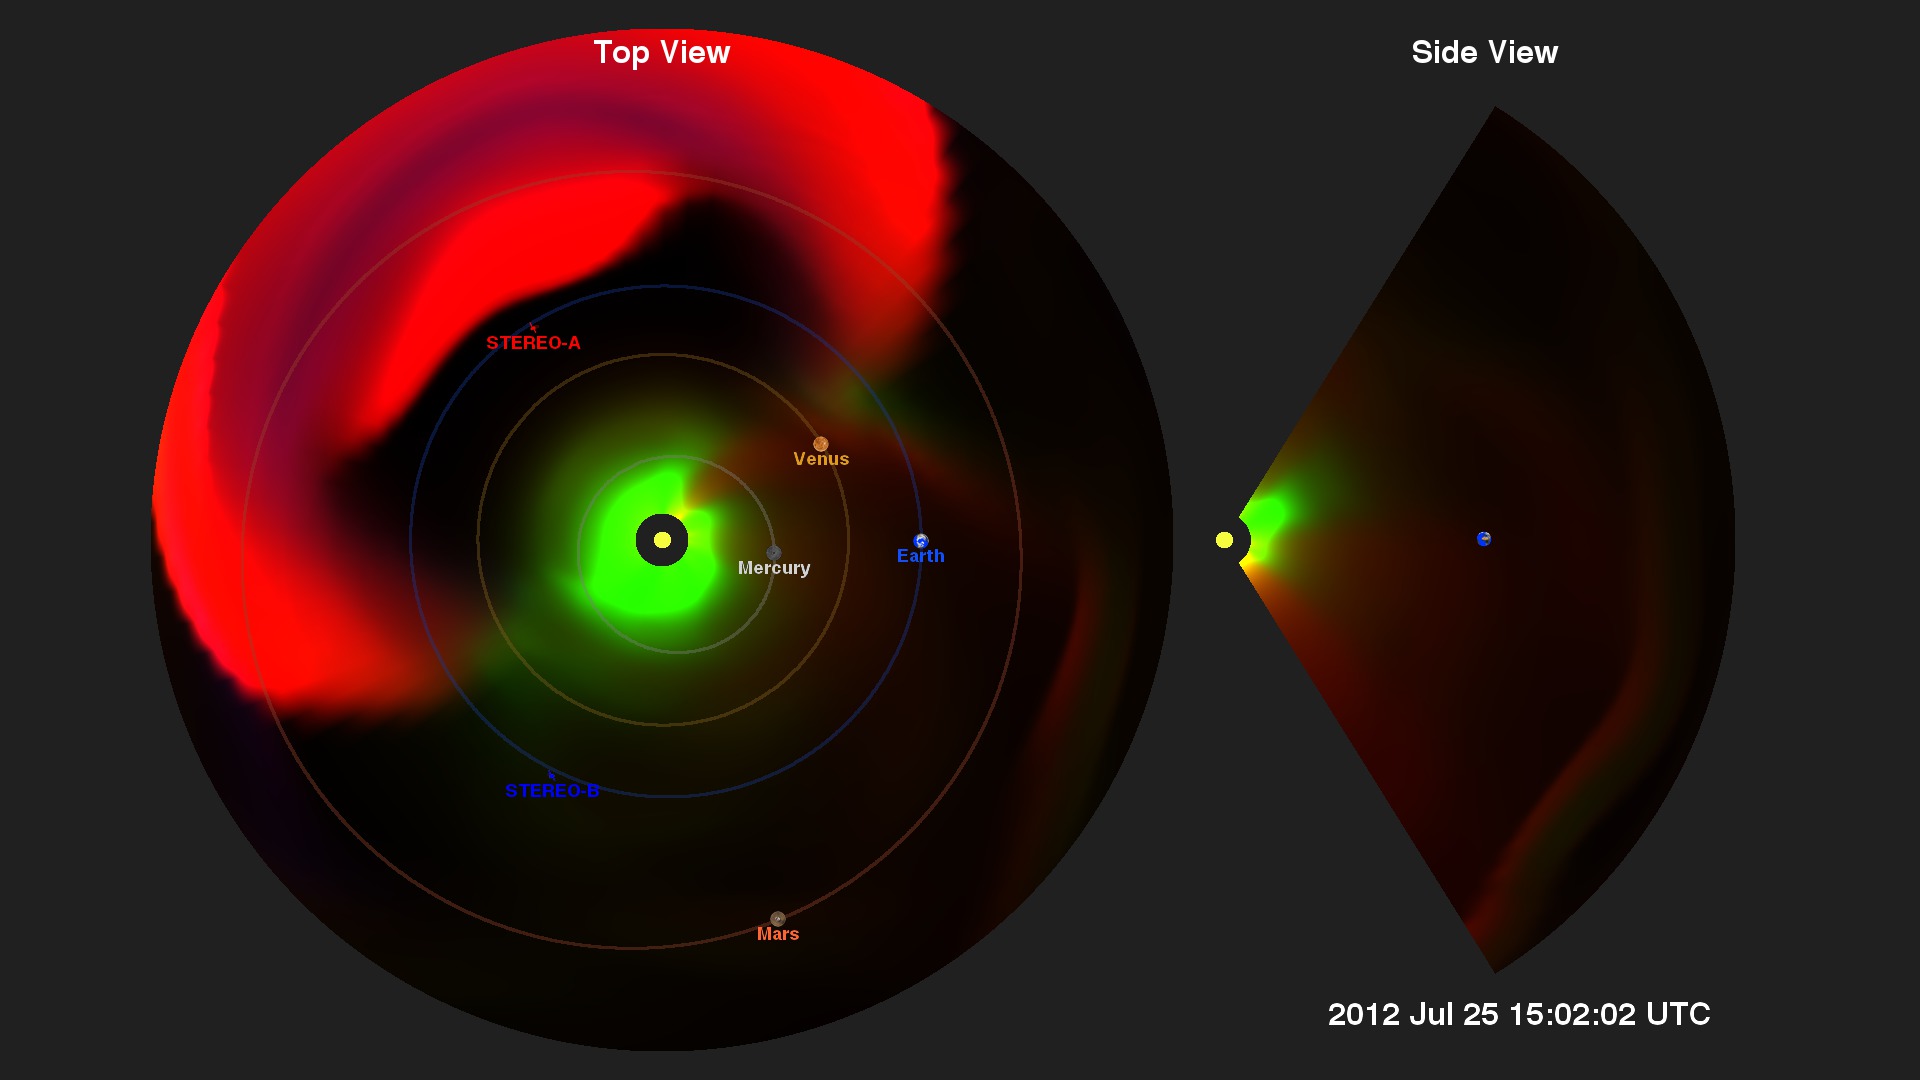 Enlil model run of the July 23, 2012 CME and events leading up to it.  This movie provides a better view of the inner solar system for the CME event.  The density color table has been altered accordingly.  This view includes a 'top-down' view in the plane of Earth's orbit, as well as a slice perpendicular to the orbit which passes through Earth.  We see the previous CME pass Earth, but not the July 23 event.